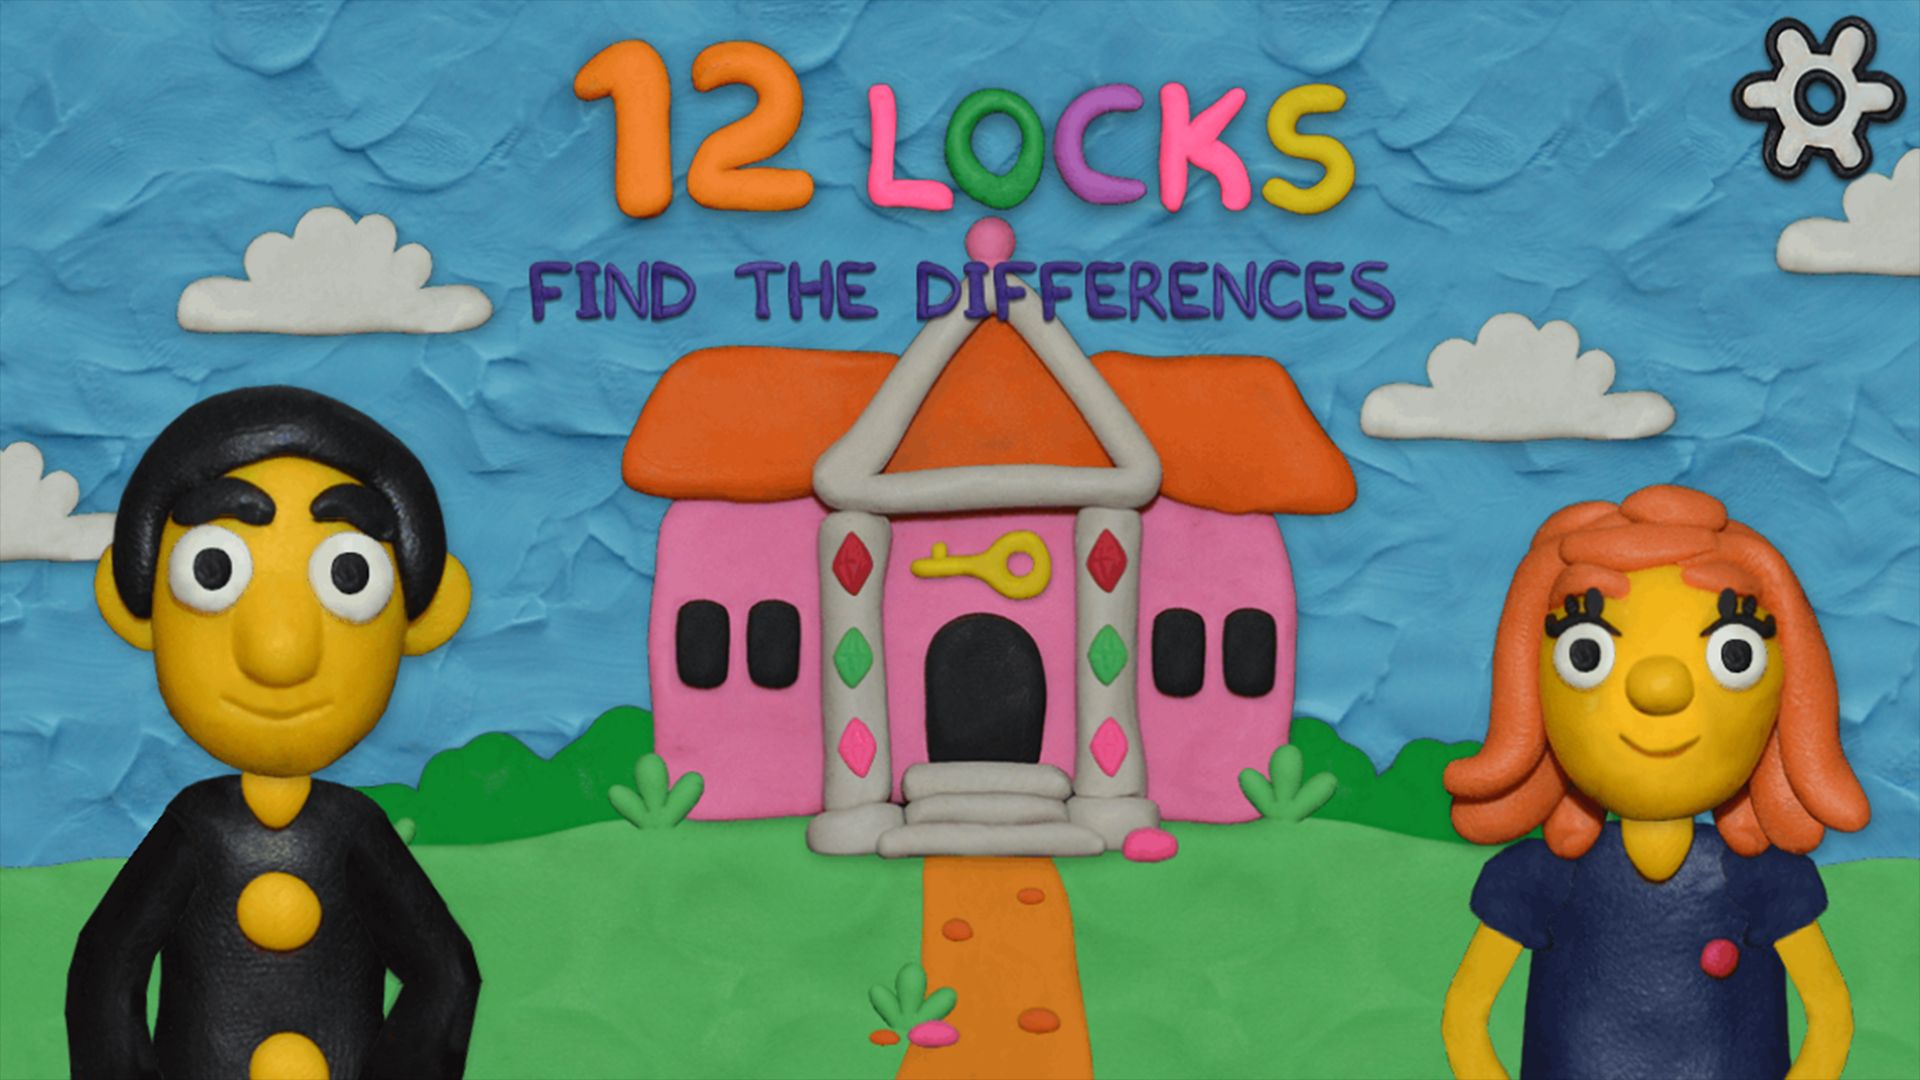 Scarica 12 Locks Find the differences gratis per Android A.n.d.r.o.i.d. .5...0. .a.n.d. .m.o.r.e.